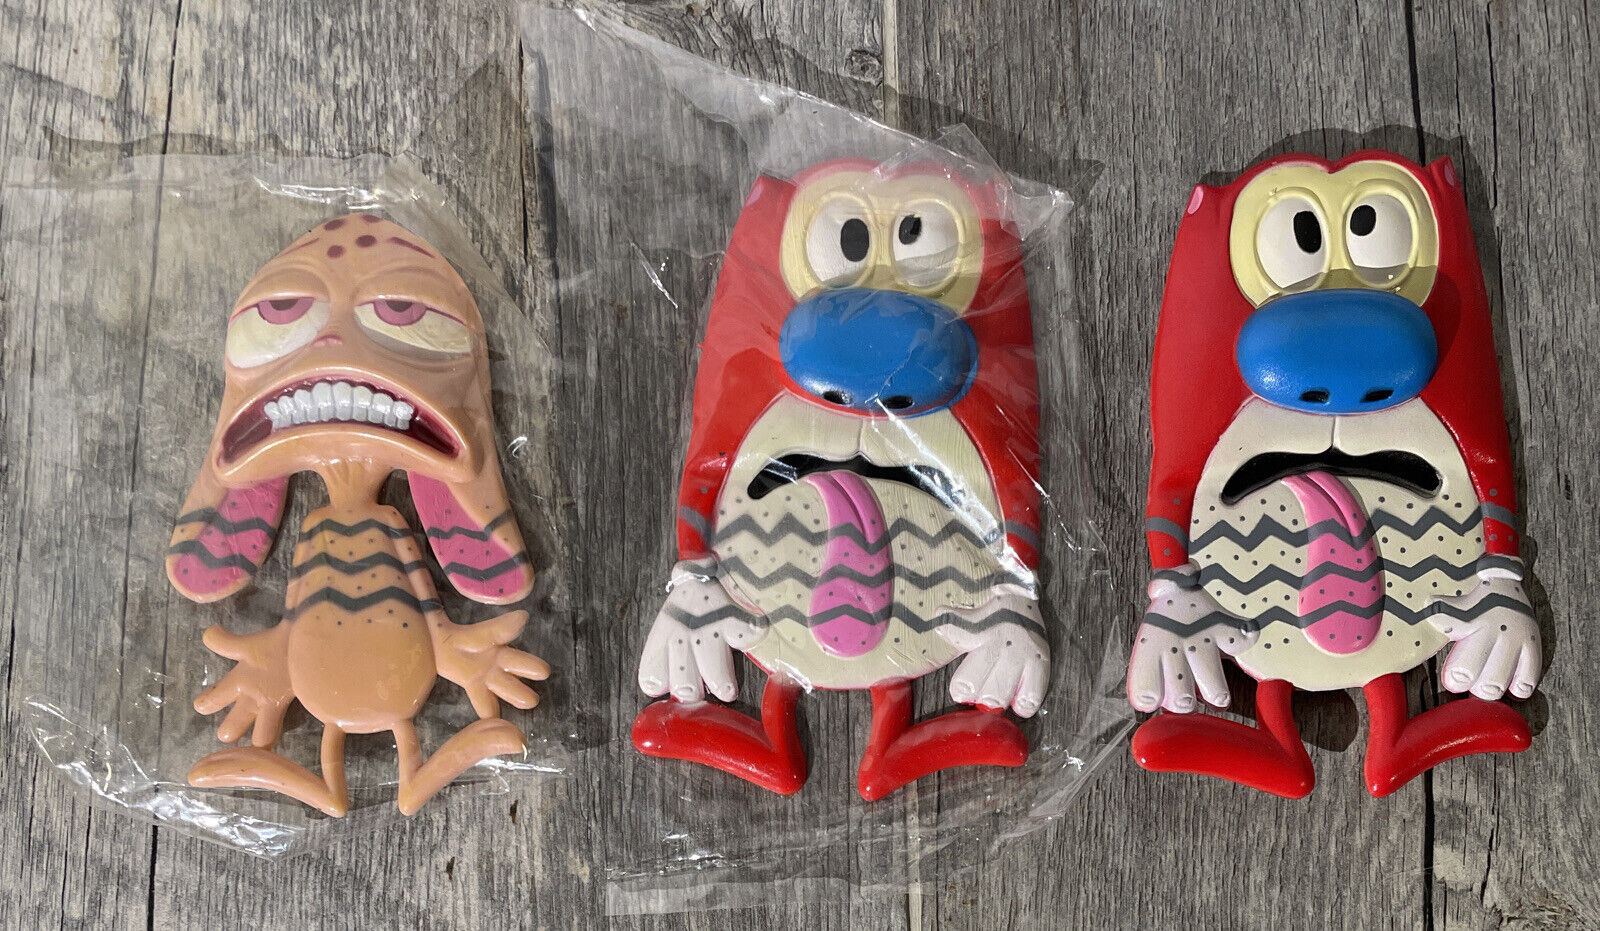 Rare REN AND STIMPY ROADKILL VINYL FIGURES COLLECTIBLE  Flattened but flattering